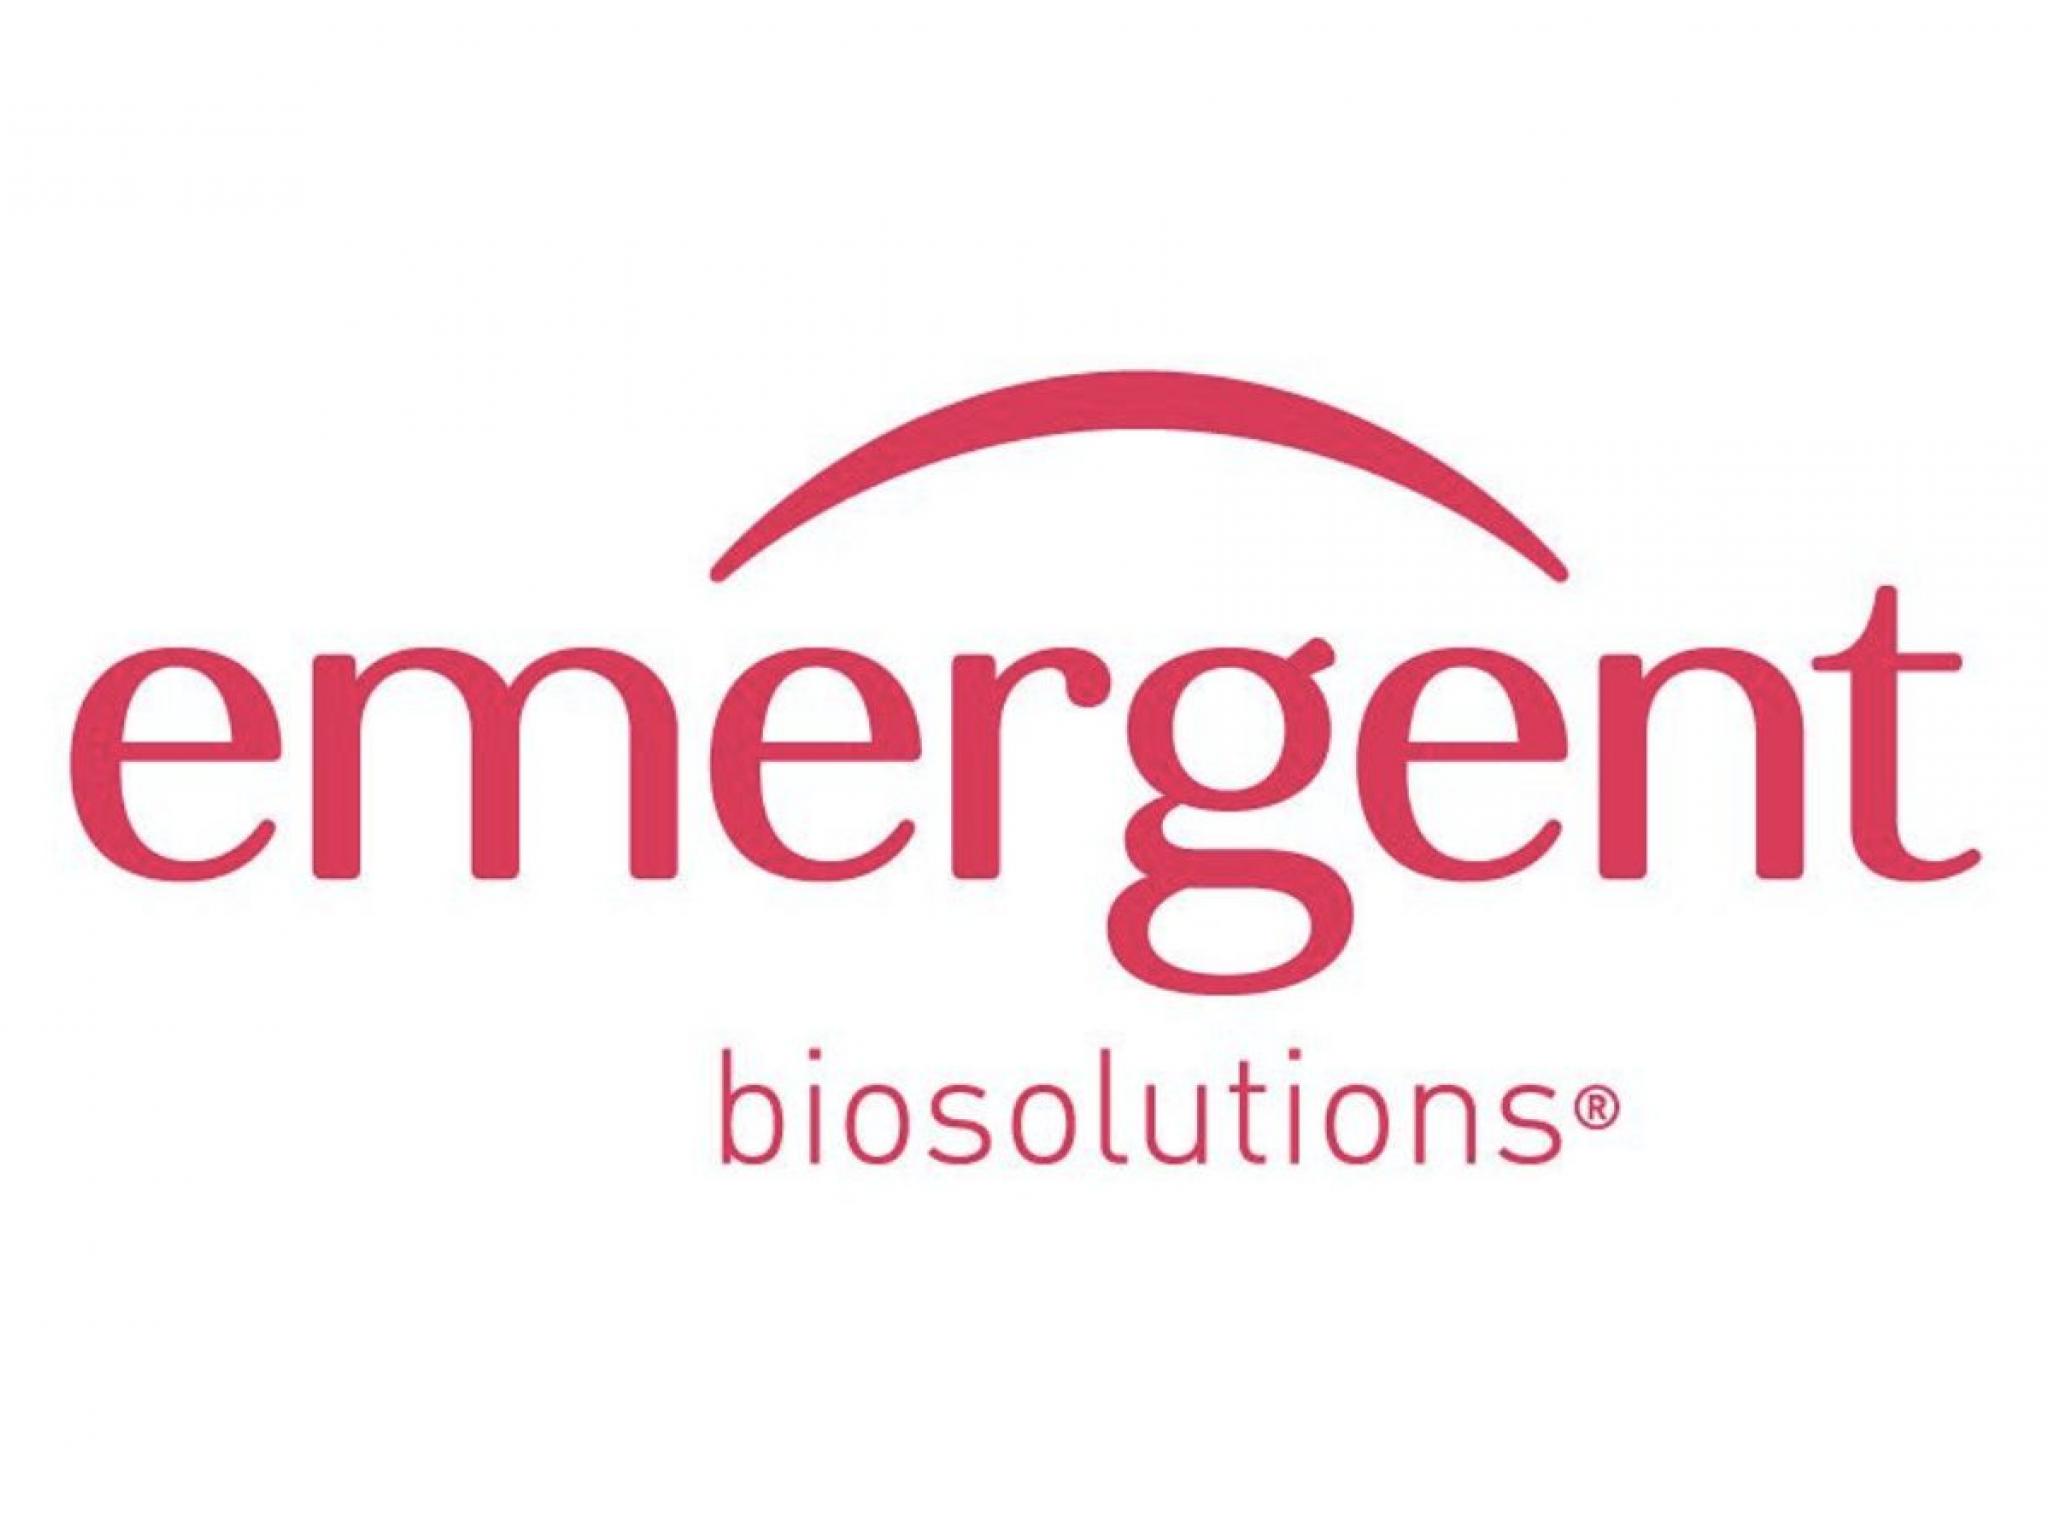  why-emergent-biosolutions-shares-are-trading-higher-by-16-here-are-20-stocks-moving-premarket 